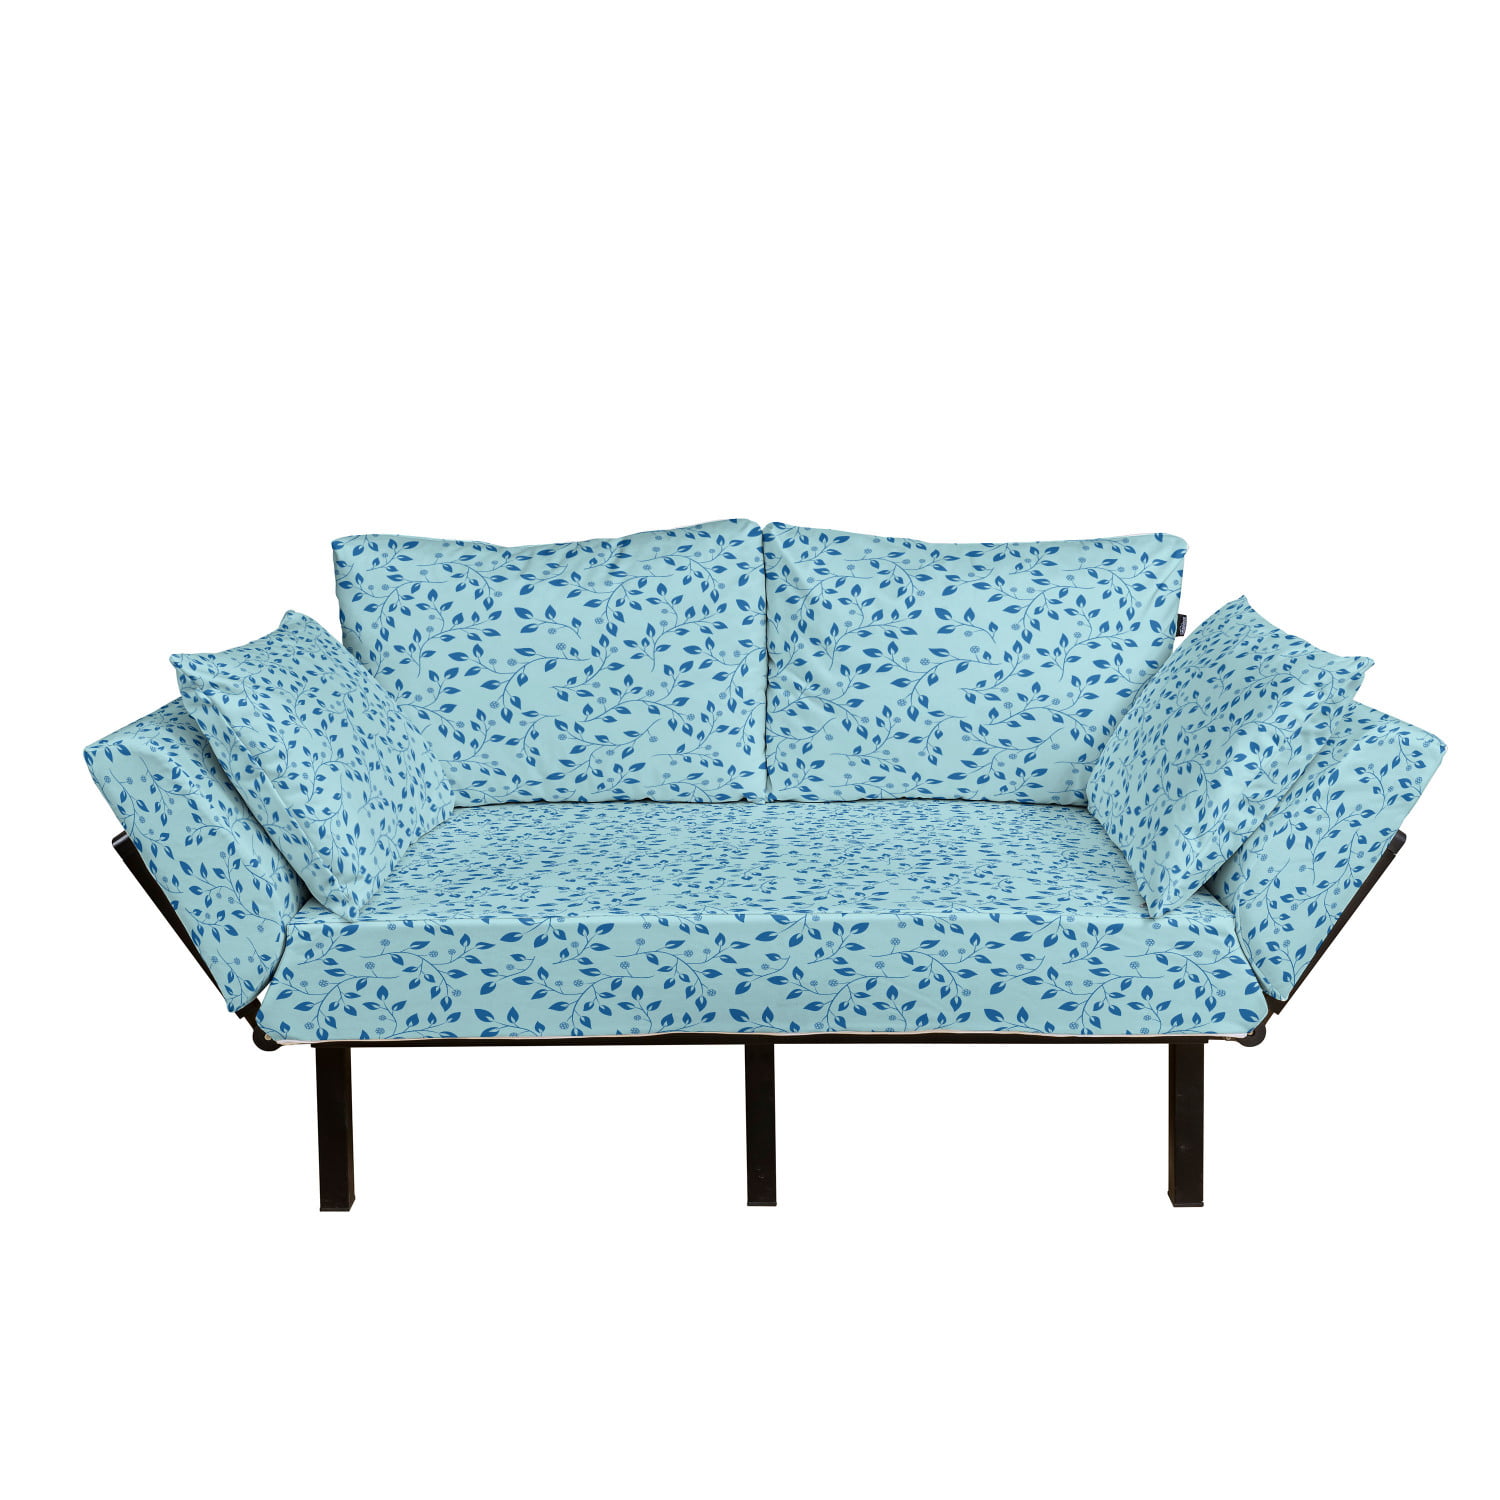 Daybed with Metal Frame Upholstered Sofa for Living Dorm Ornate Silhouette Leafy Items Berries Rustic Country Life Inspirations Loveseat Ambesonne Leaves Futon Couch Blue Pale Blue 